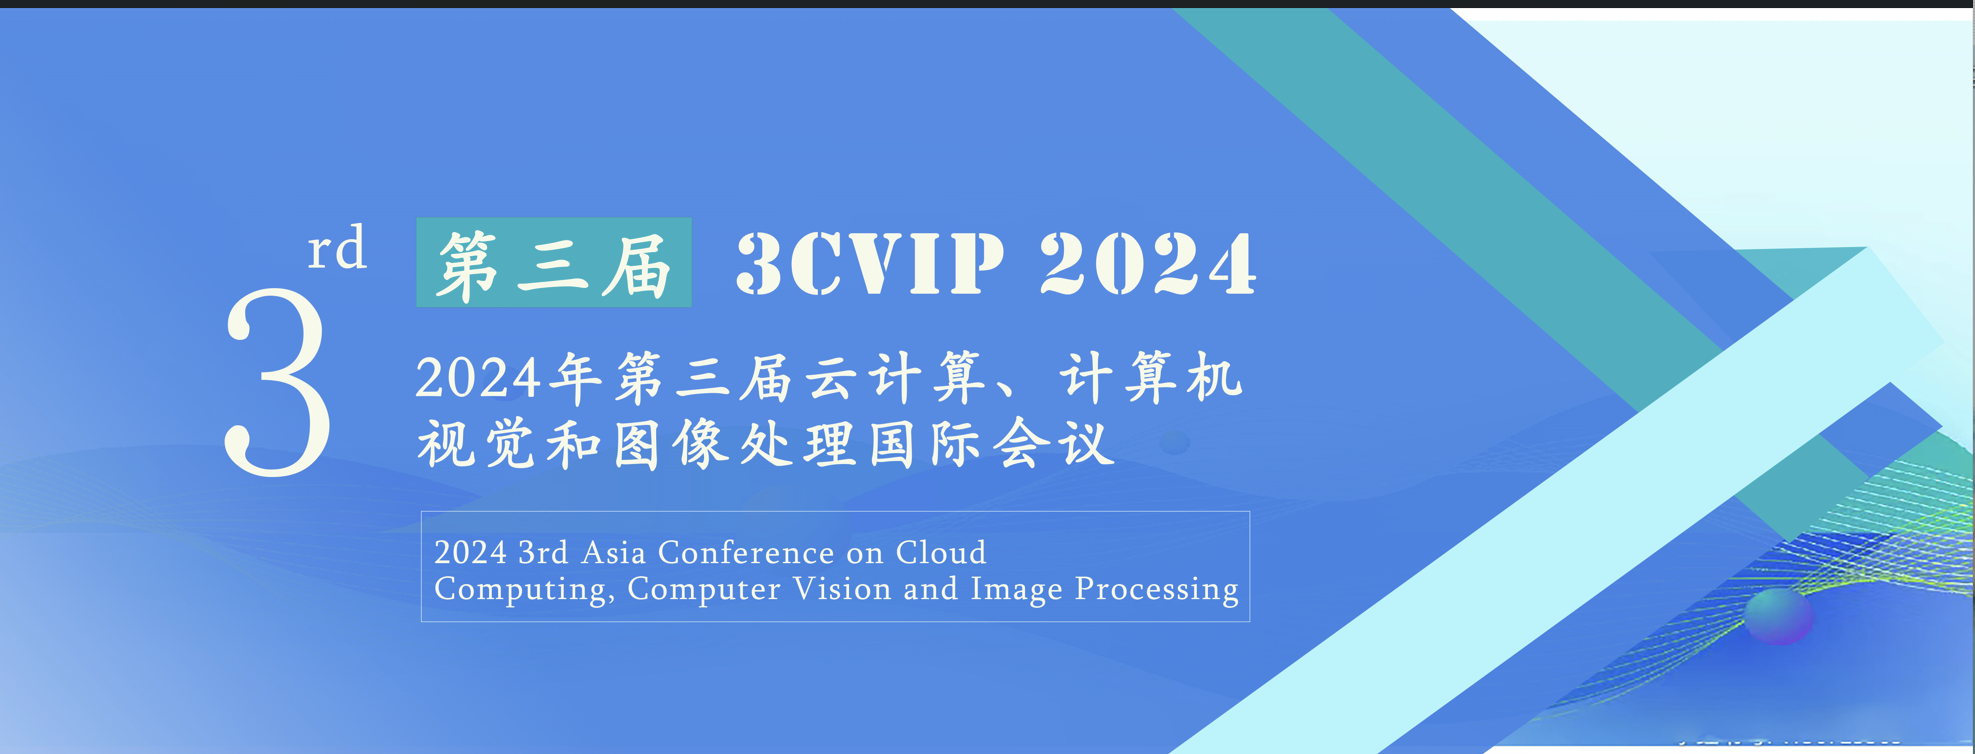 2024 3rd Asia Conference on Cloud Computing, Computer Vision and Image Processing (3CVIP 2024), Shanghai, China